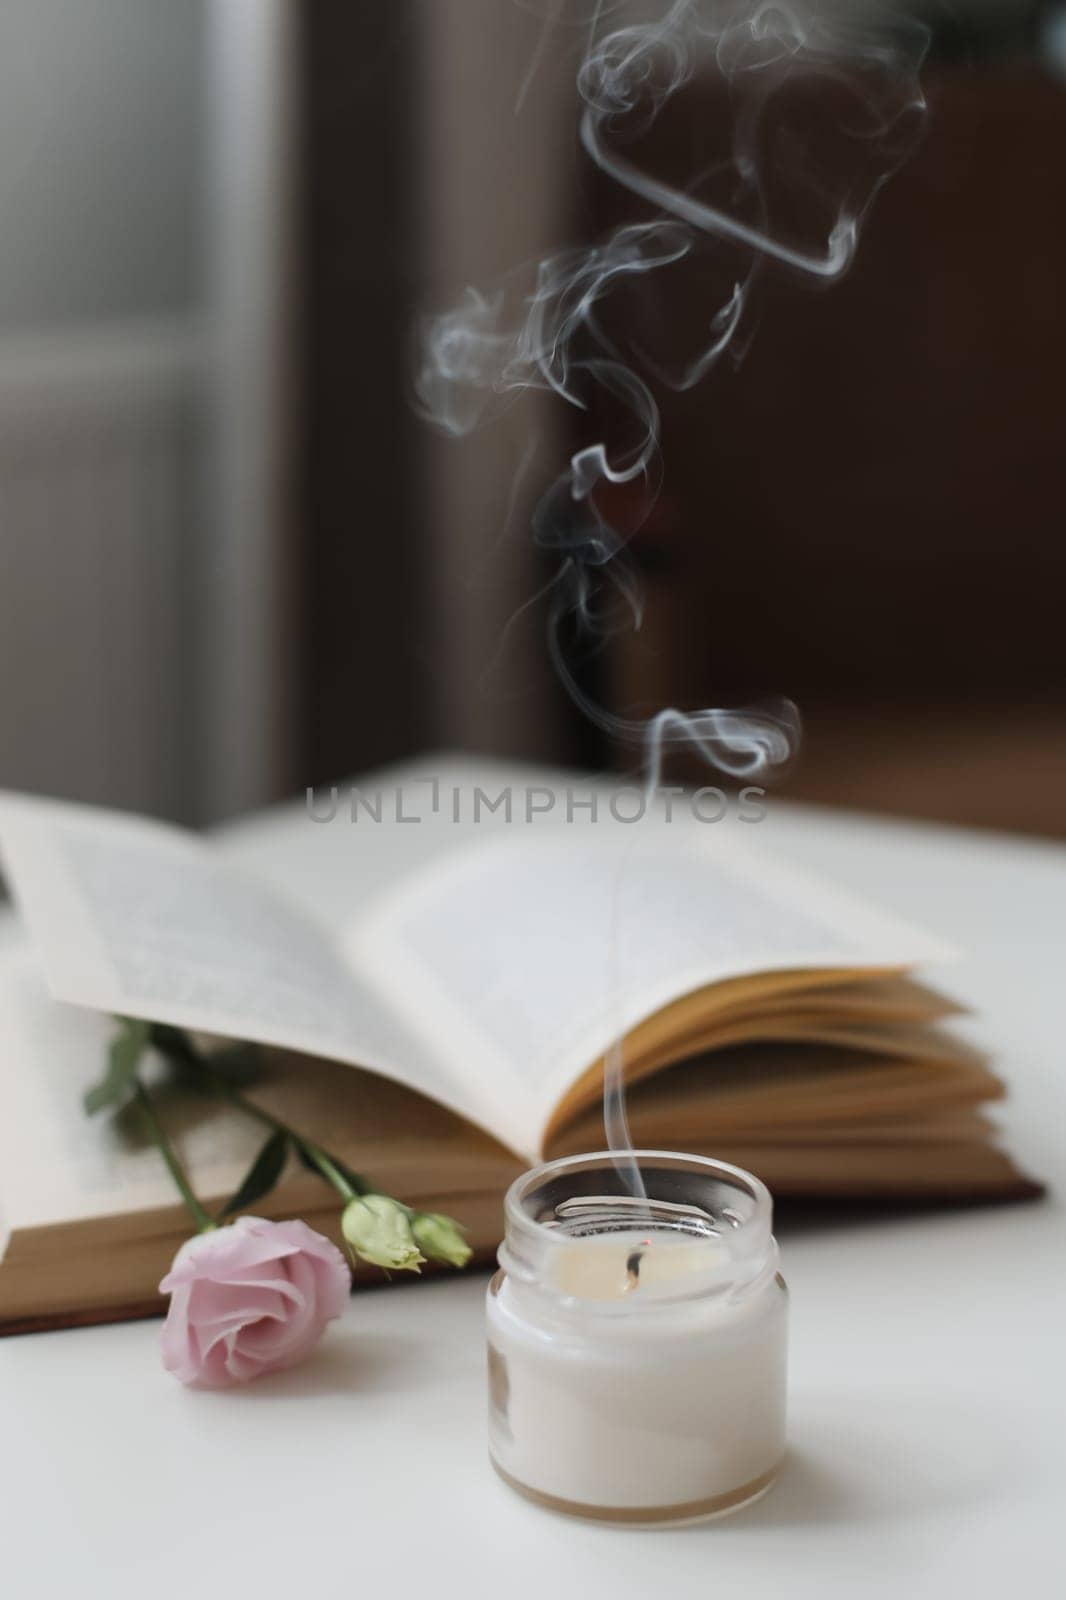 Still life details in home interior of living room. Eco-friendly fragrance for the home. Cozy home concept. Open book with flower, burning candle with smoke